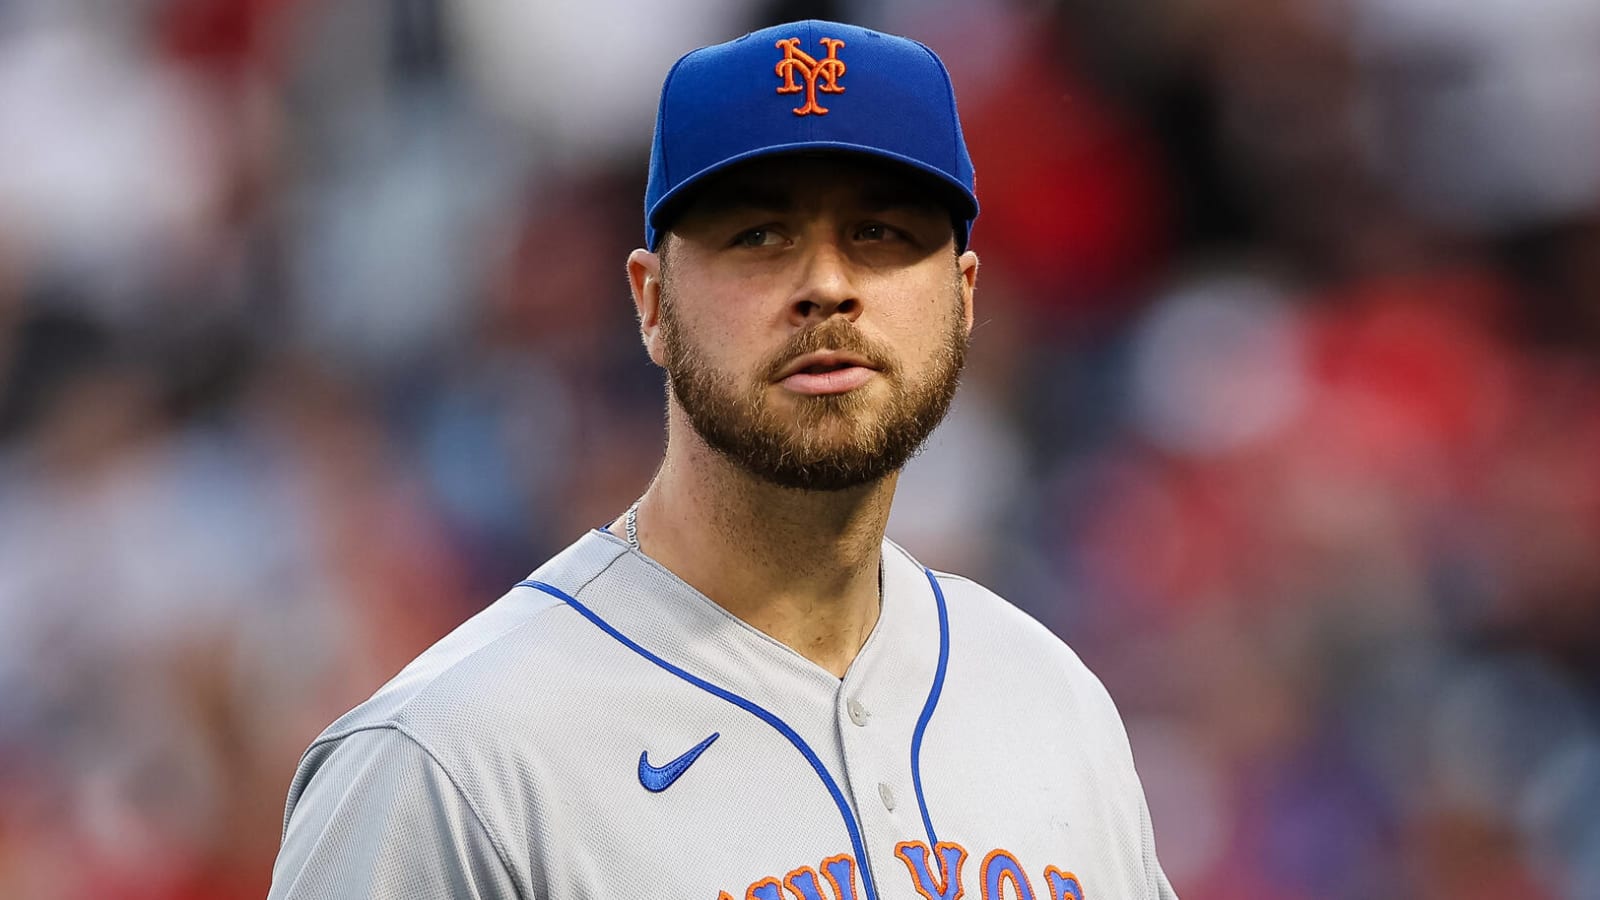 Was Mets' Tylor Megill tipping pitches in loss to Nationals?